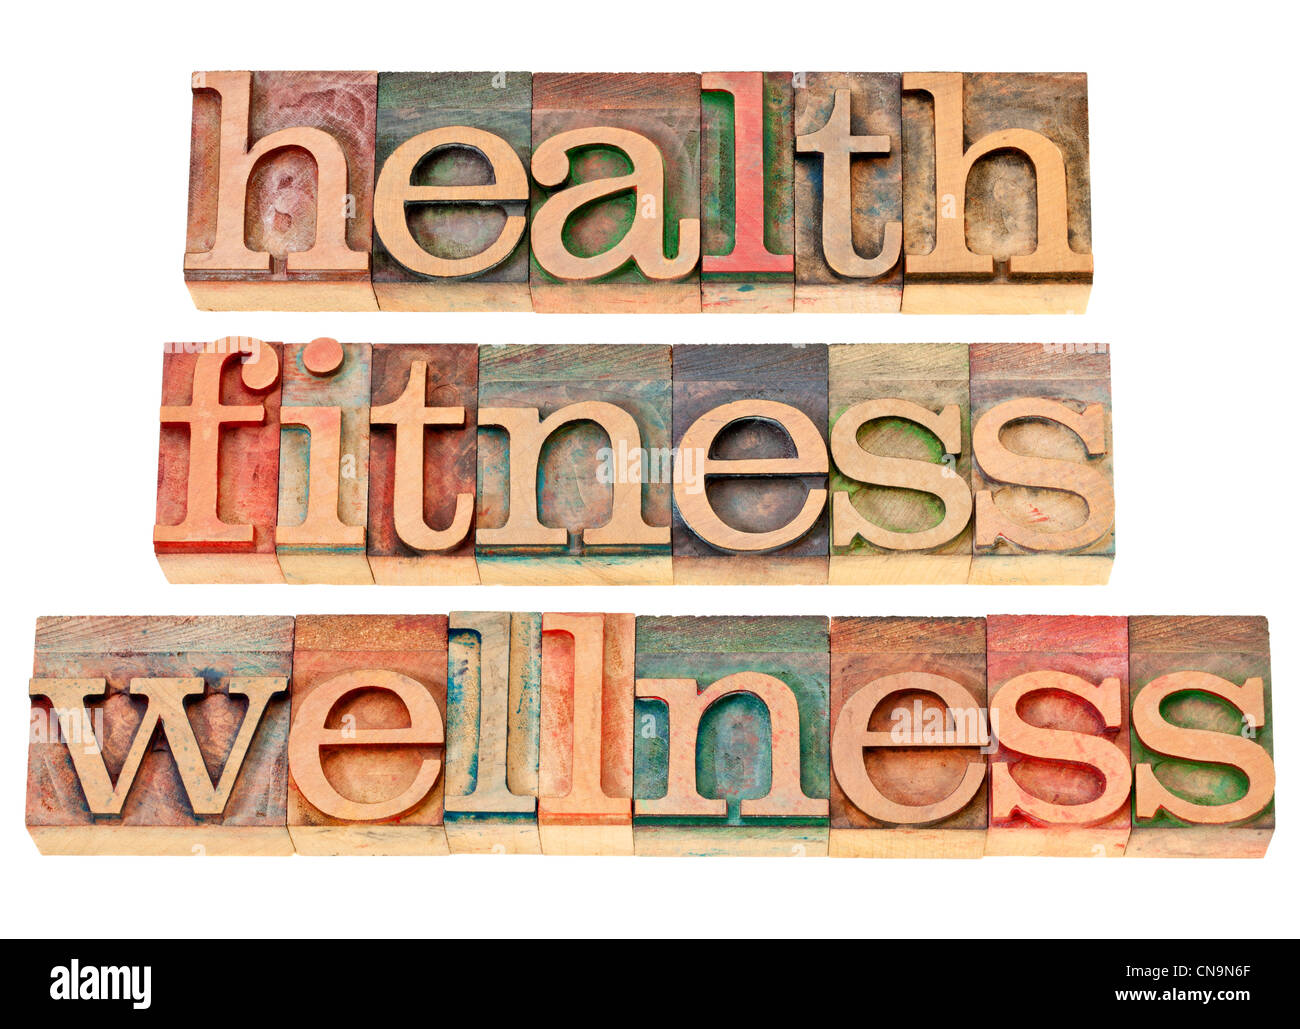 health, fitness, wellness - healthy lifestyle concept - isolated text in vintage letterpress wood type Stock Photo